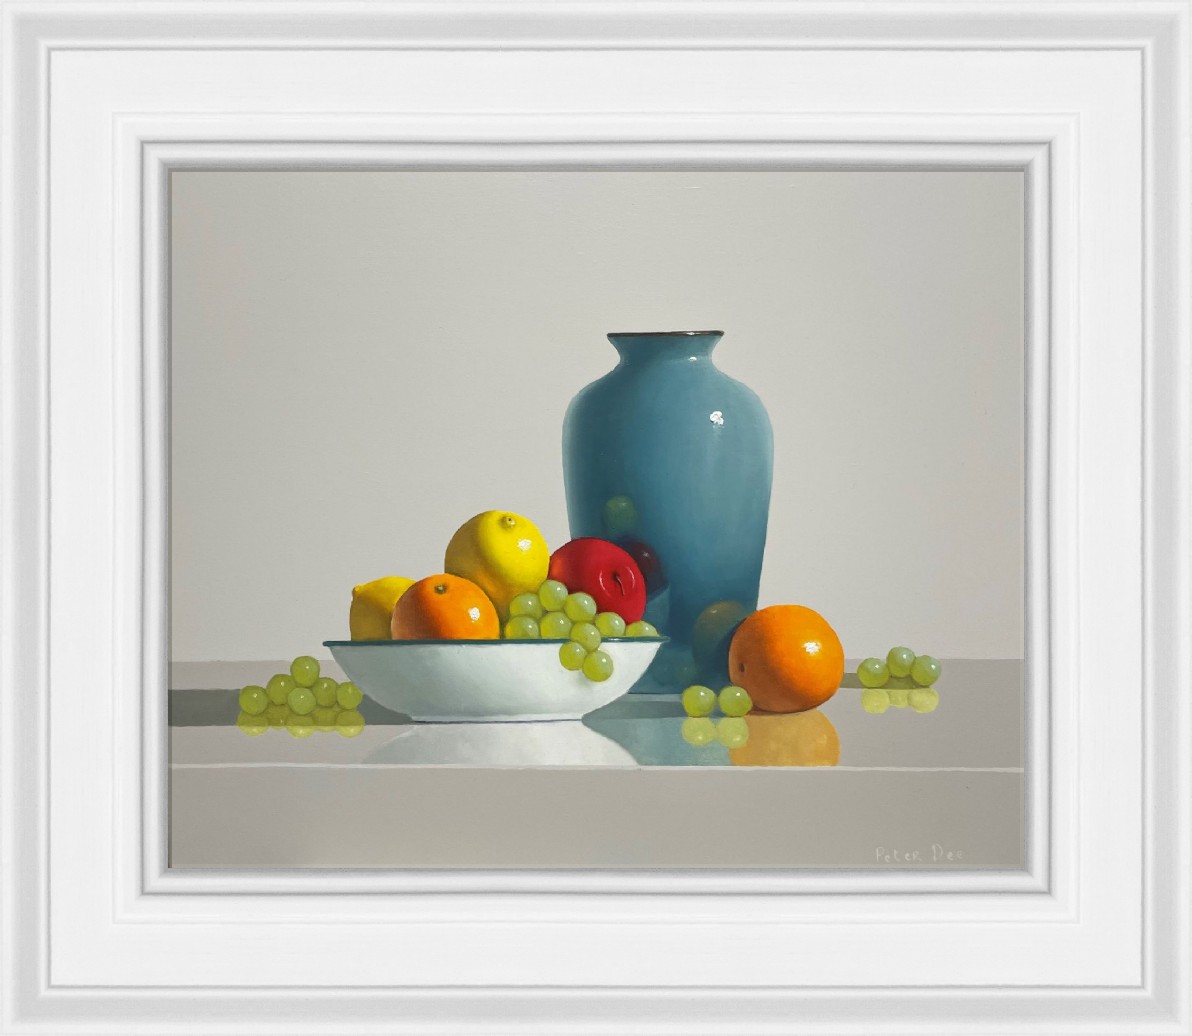 Turquoise Vase with Fruit by Peter Dee